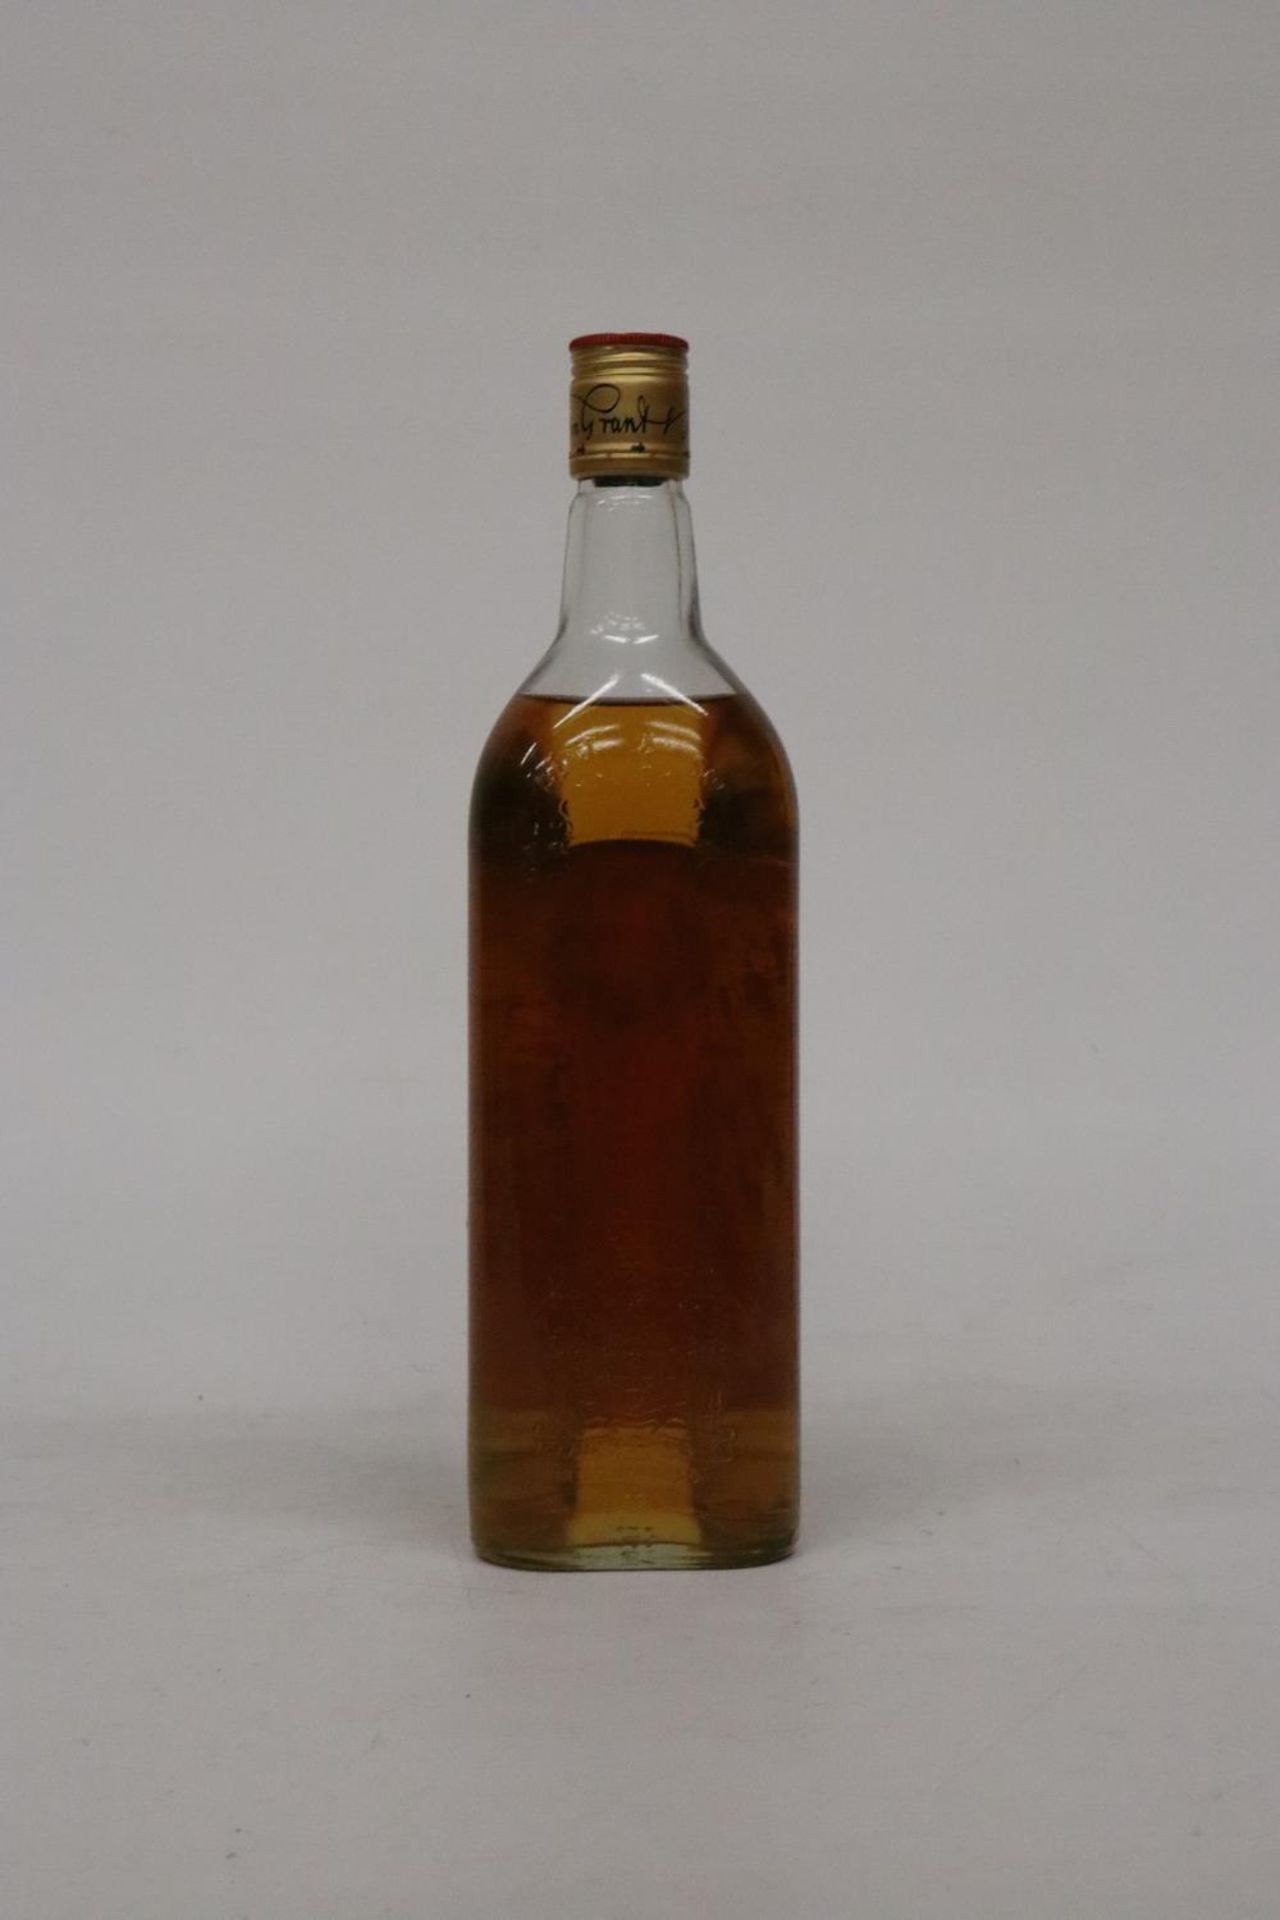 A 75.7CL BOTTLE OF GRANTS SCOTCH WHISKY - Image 2 of 4